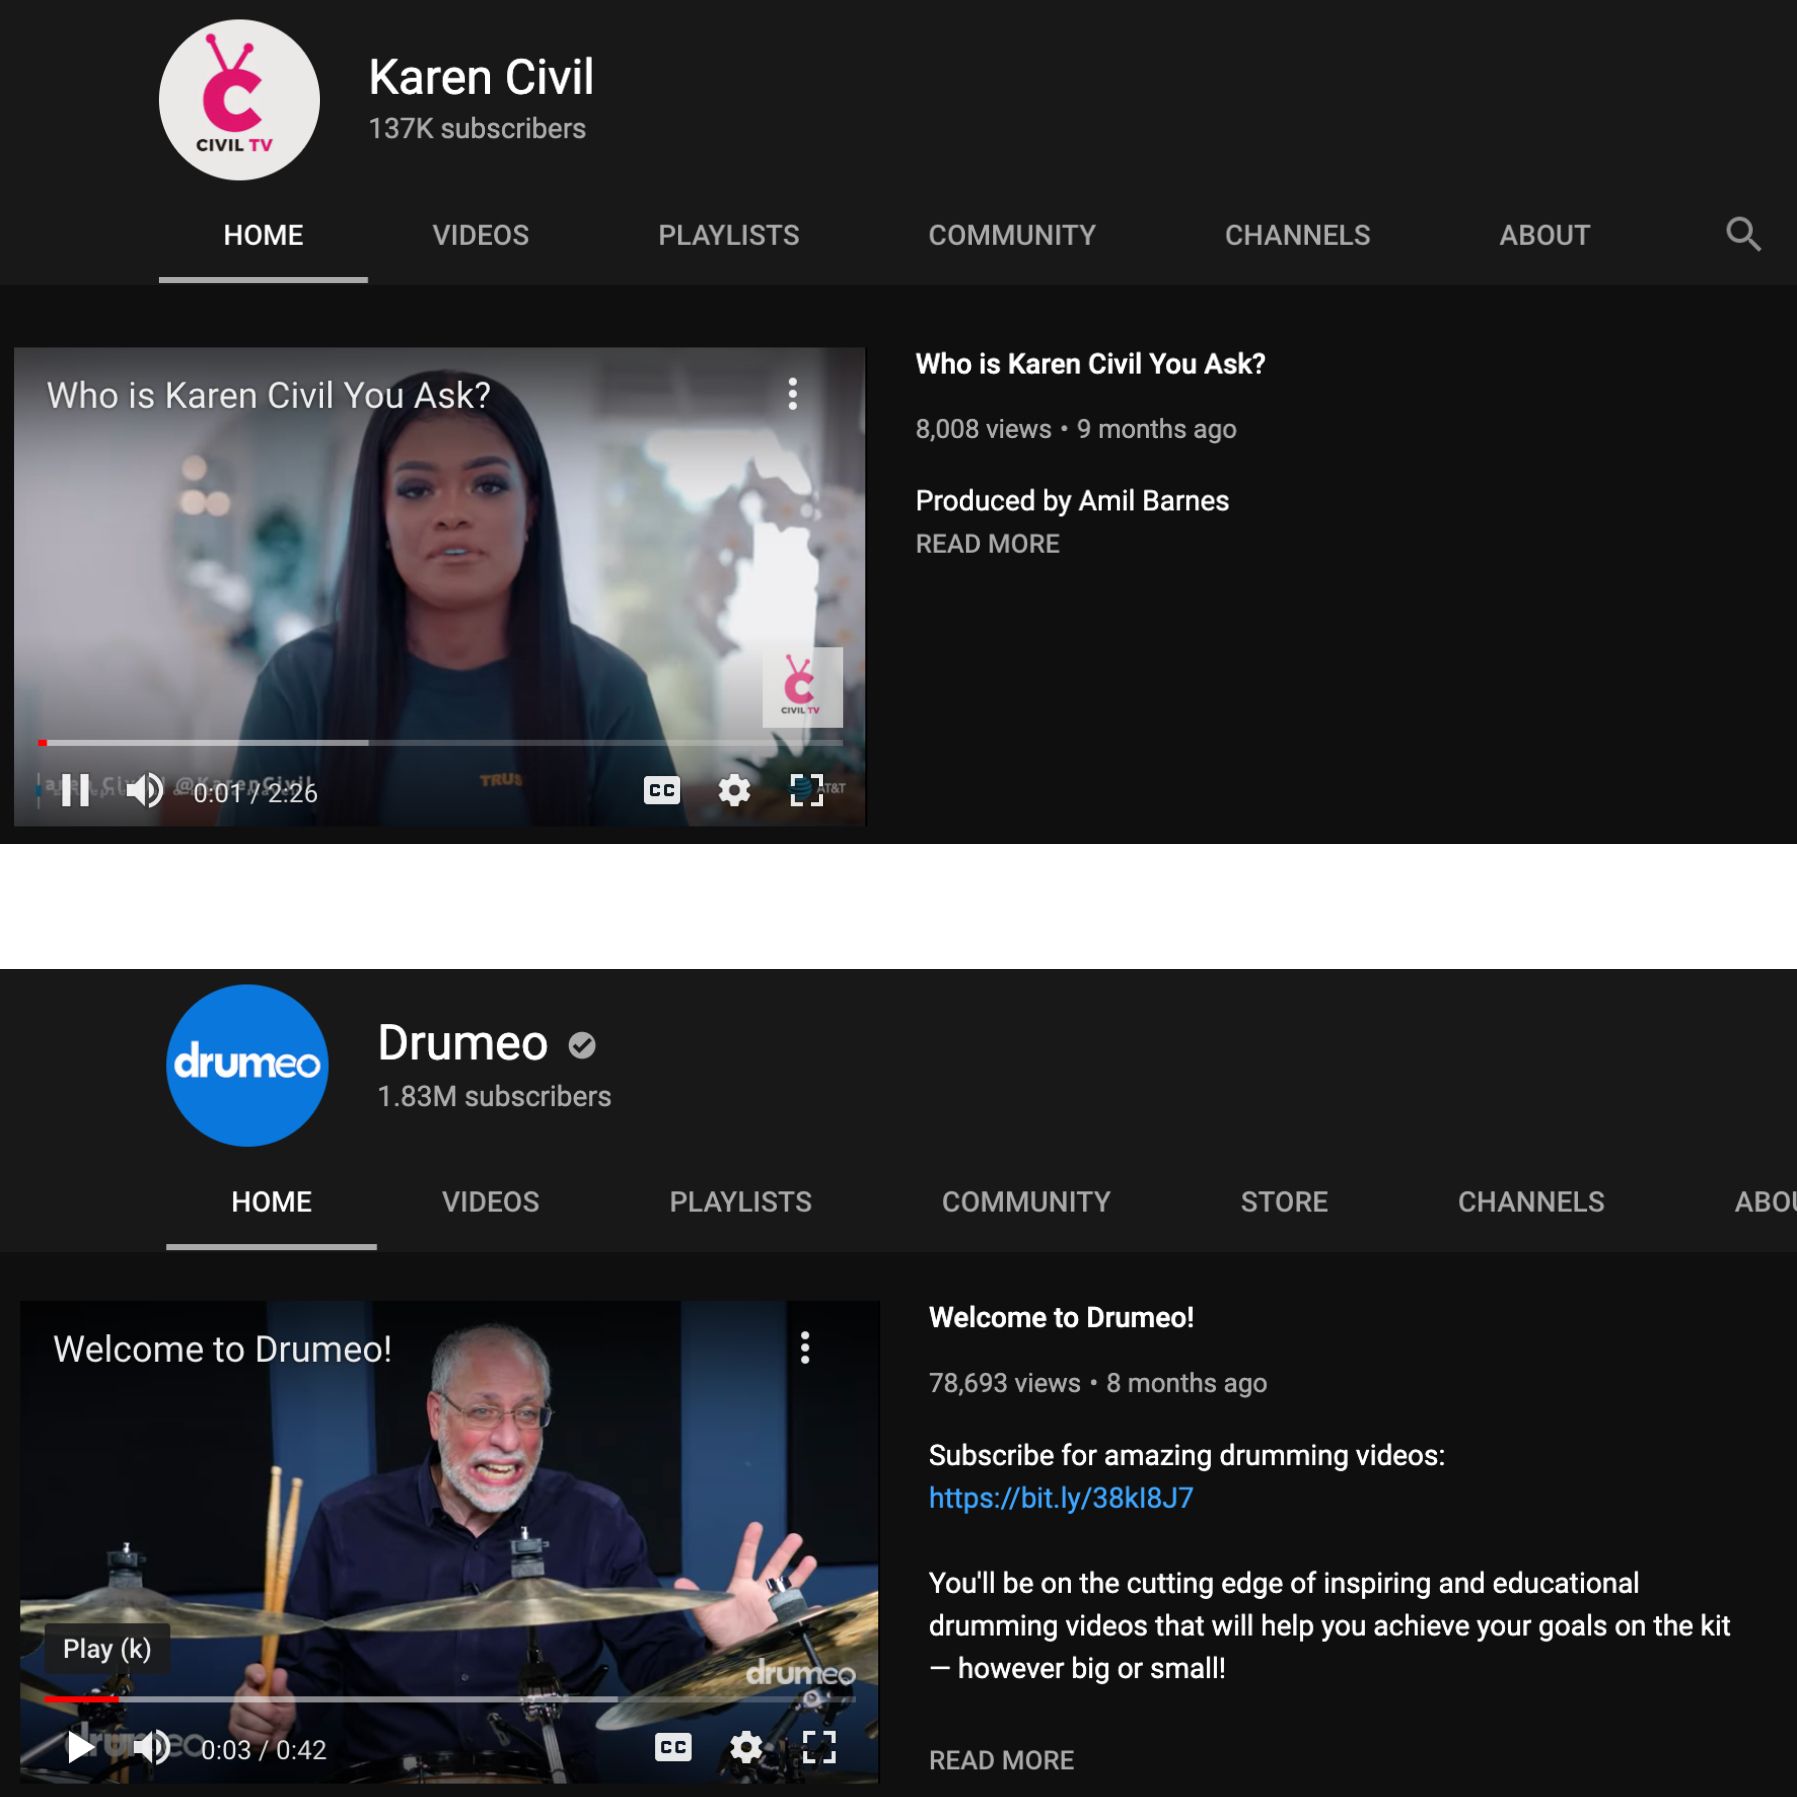 Screenshots of the channel trailers from the YouTube channels of Karen Civil and Drumeo. 